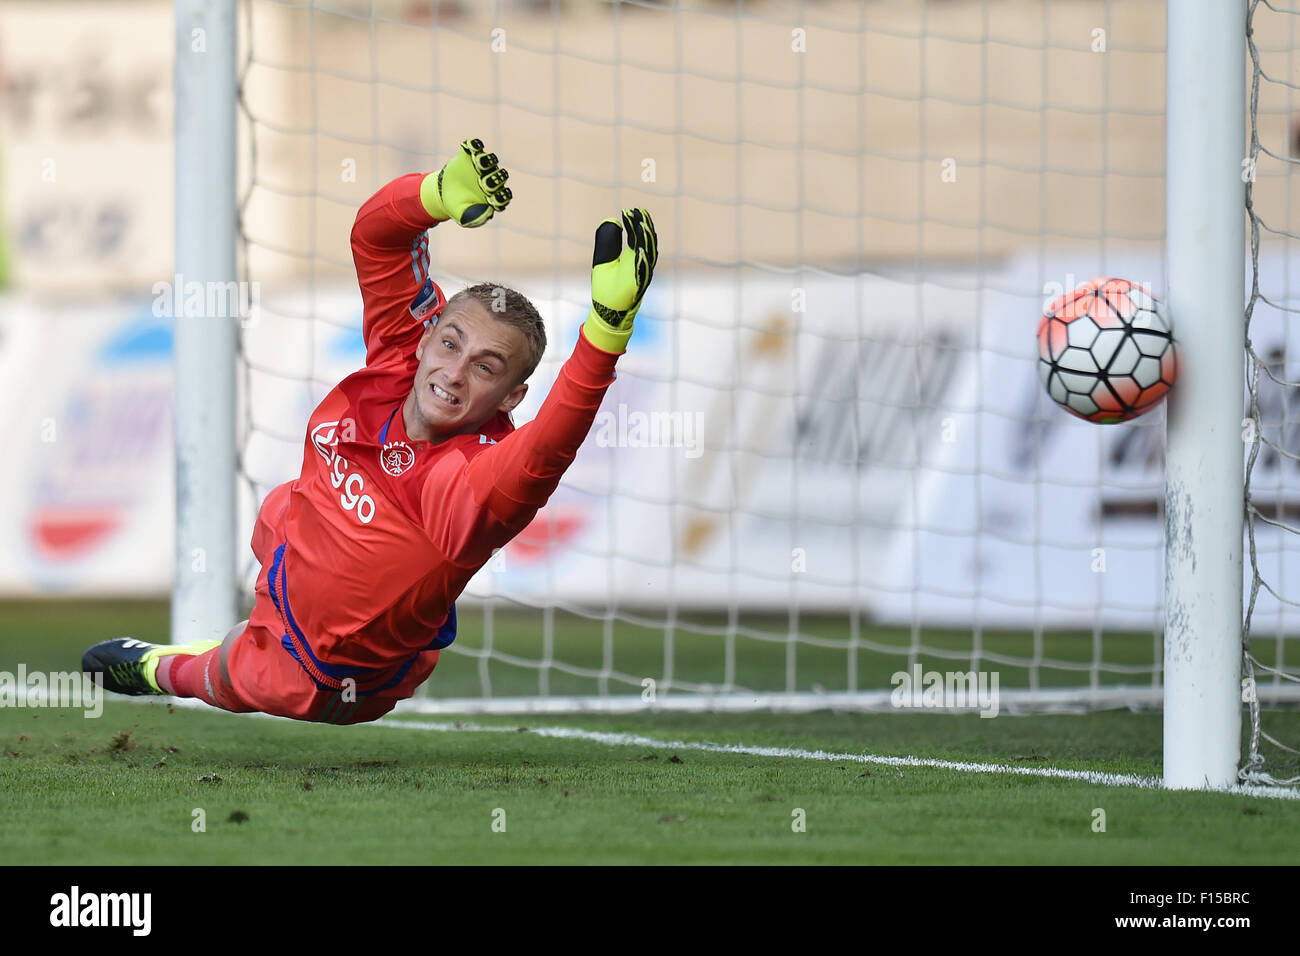 Goalkeeper Jasper Cillessen of Ajax, right, saves penalty during the fourth qualifying round of the UEFA Europa League match FK Jablonec vs Ajax Amsterdam in Jablonec nad Nisou, Czech Republic, on Thursday, August 27, 2015. (CTK Photo/Radek Petrasek) Stock Photo